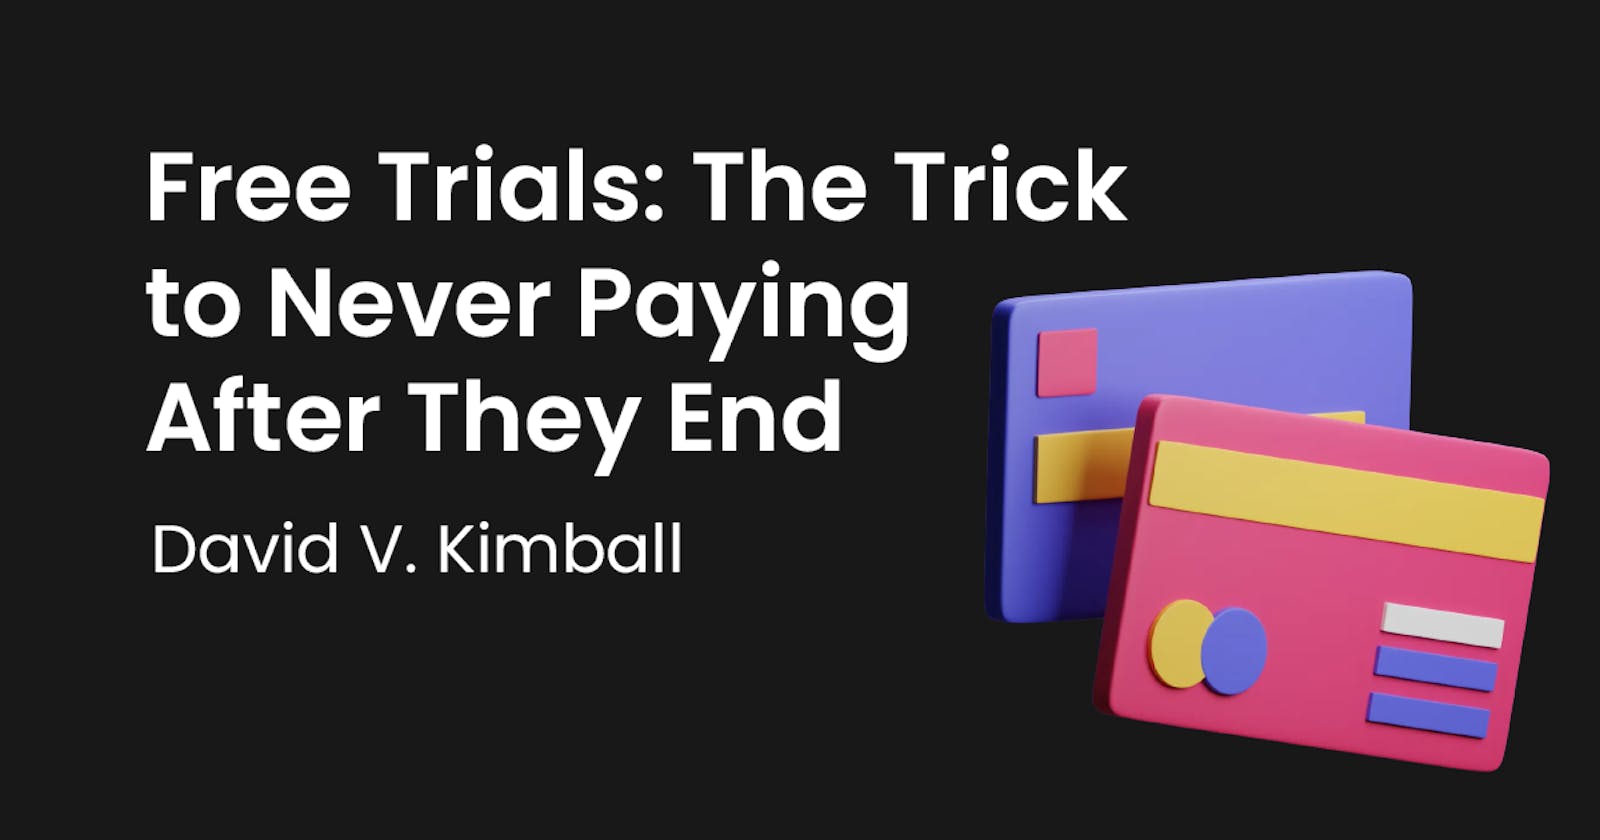 Free Trials: The Trick to Never Paying After They End